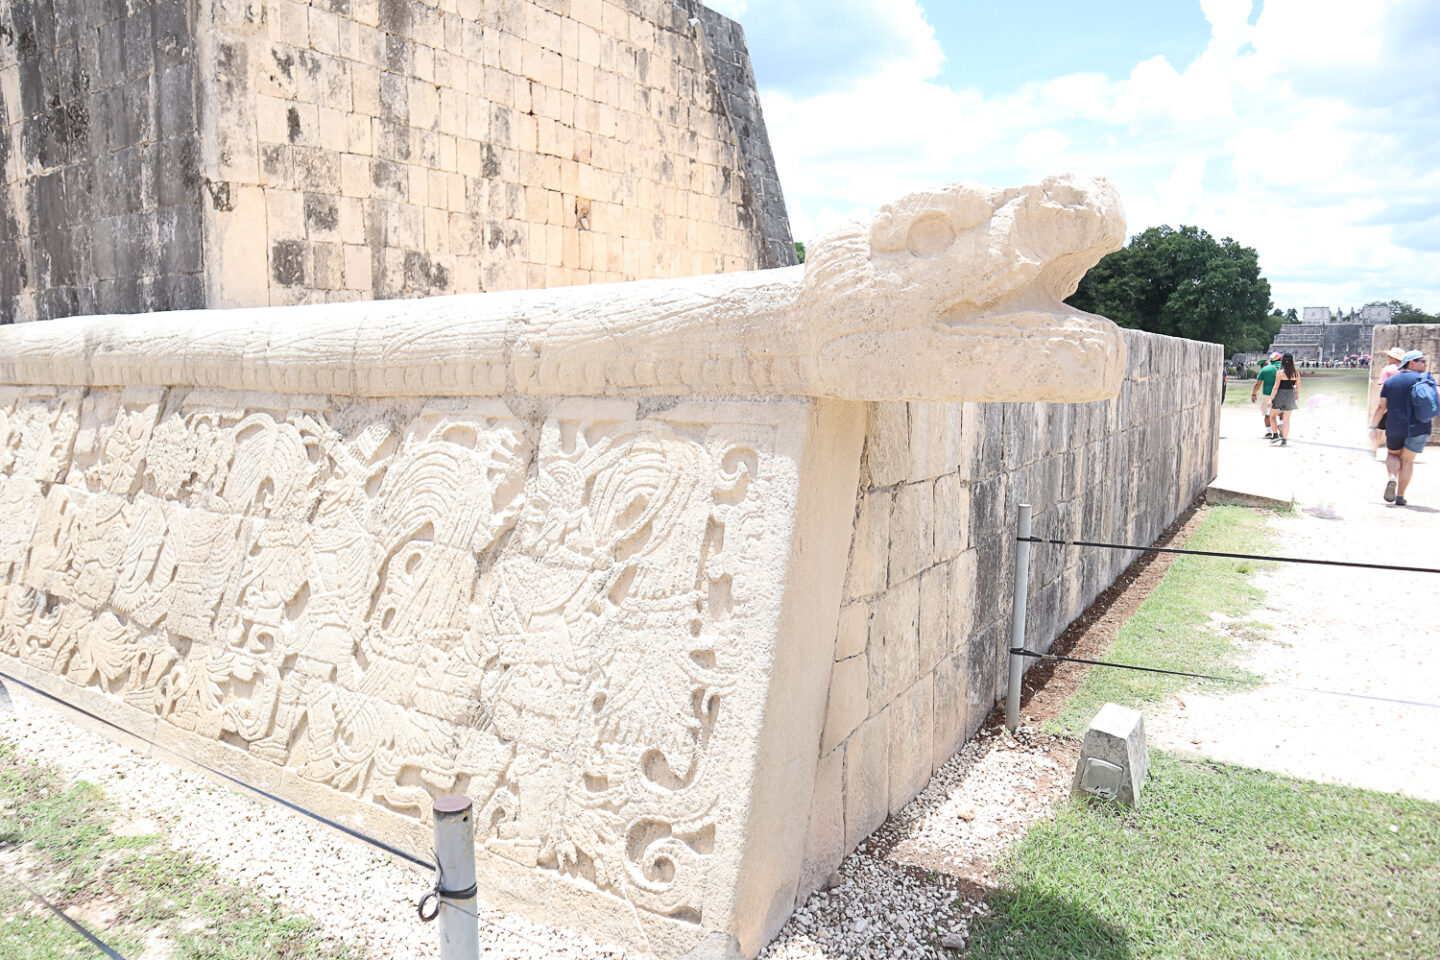 Pacific Globetrotters, budget family travel blog, shares 5 must see spots in Cancun. Chichén Itzá